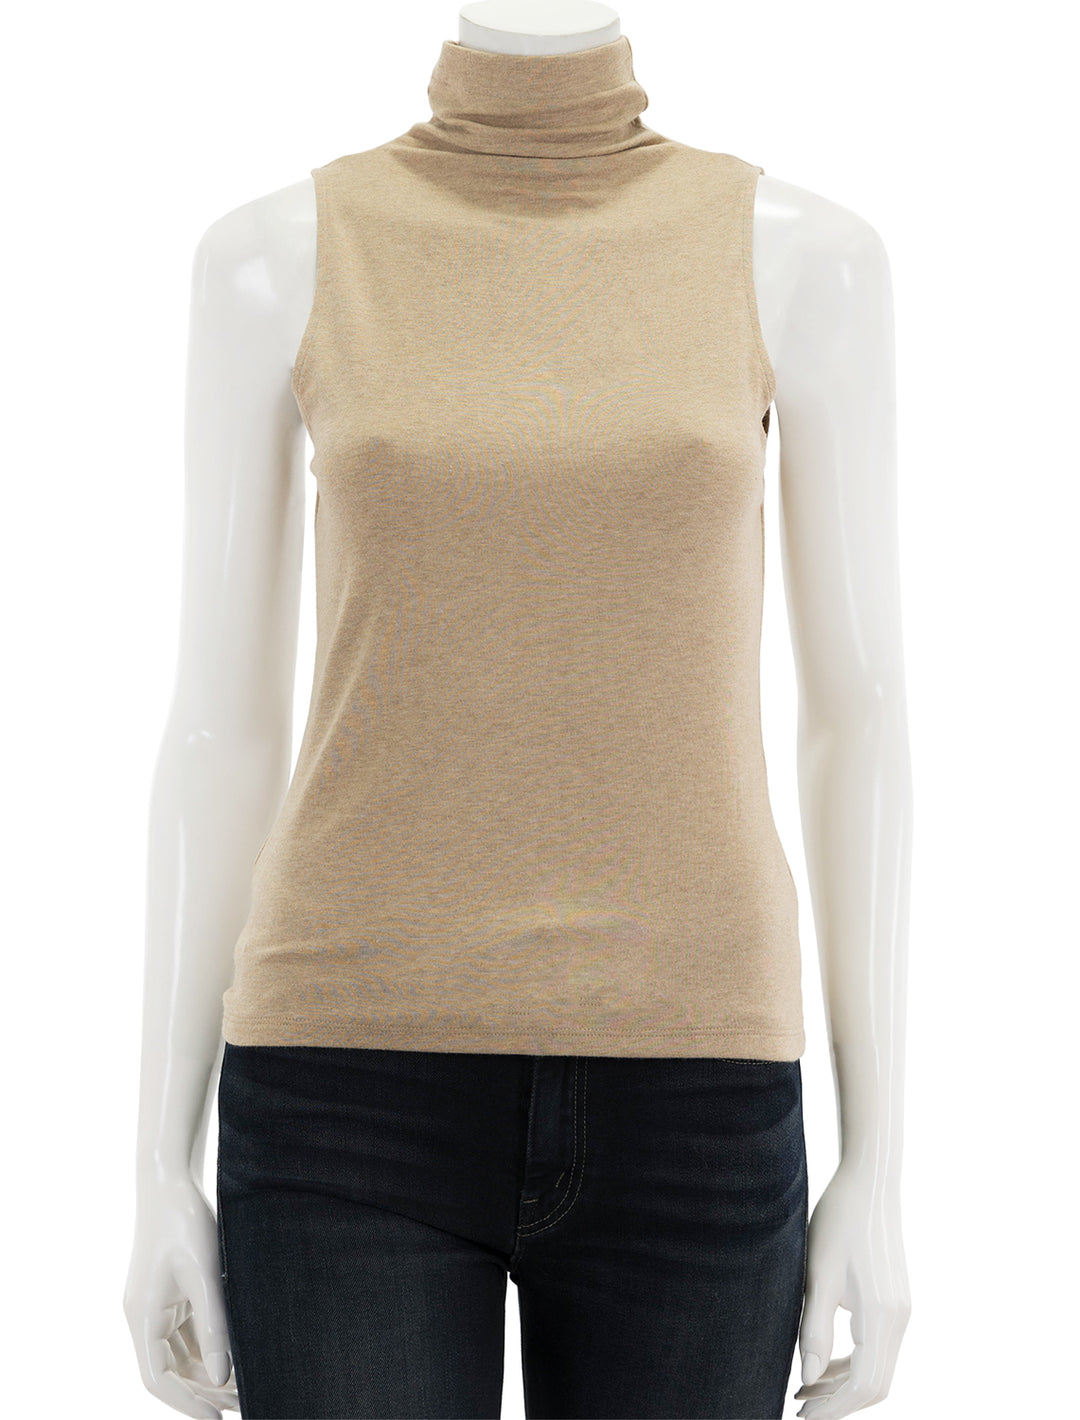 Front view of Vince's sleeveless turtleneck in cashew.